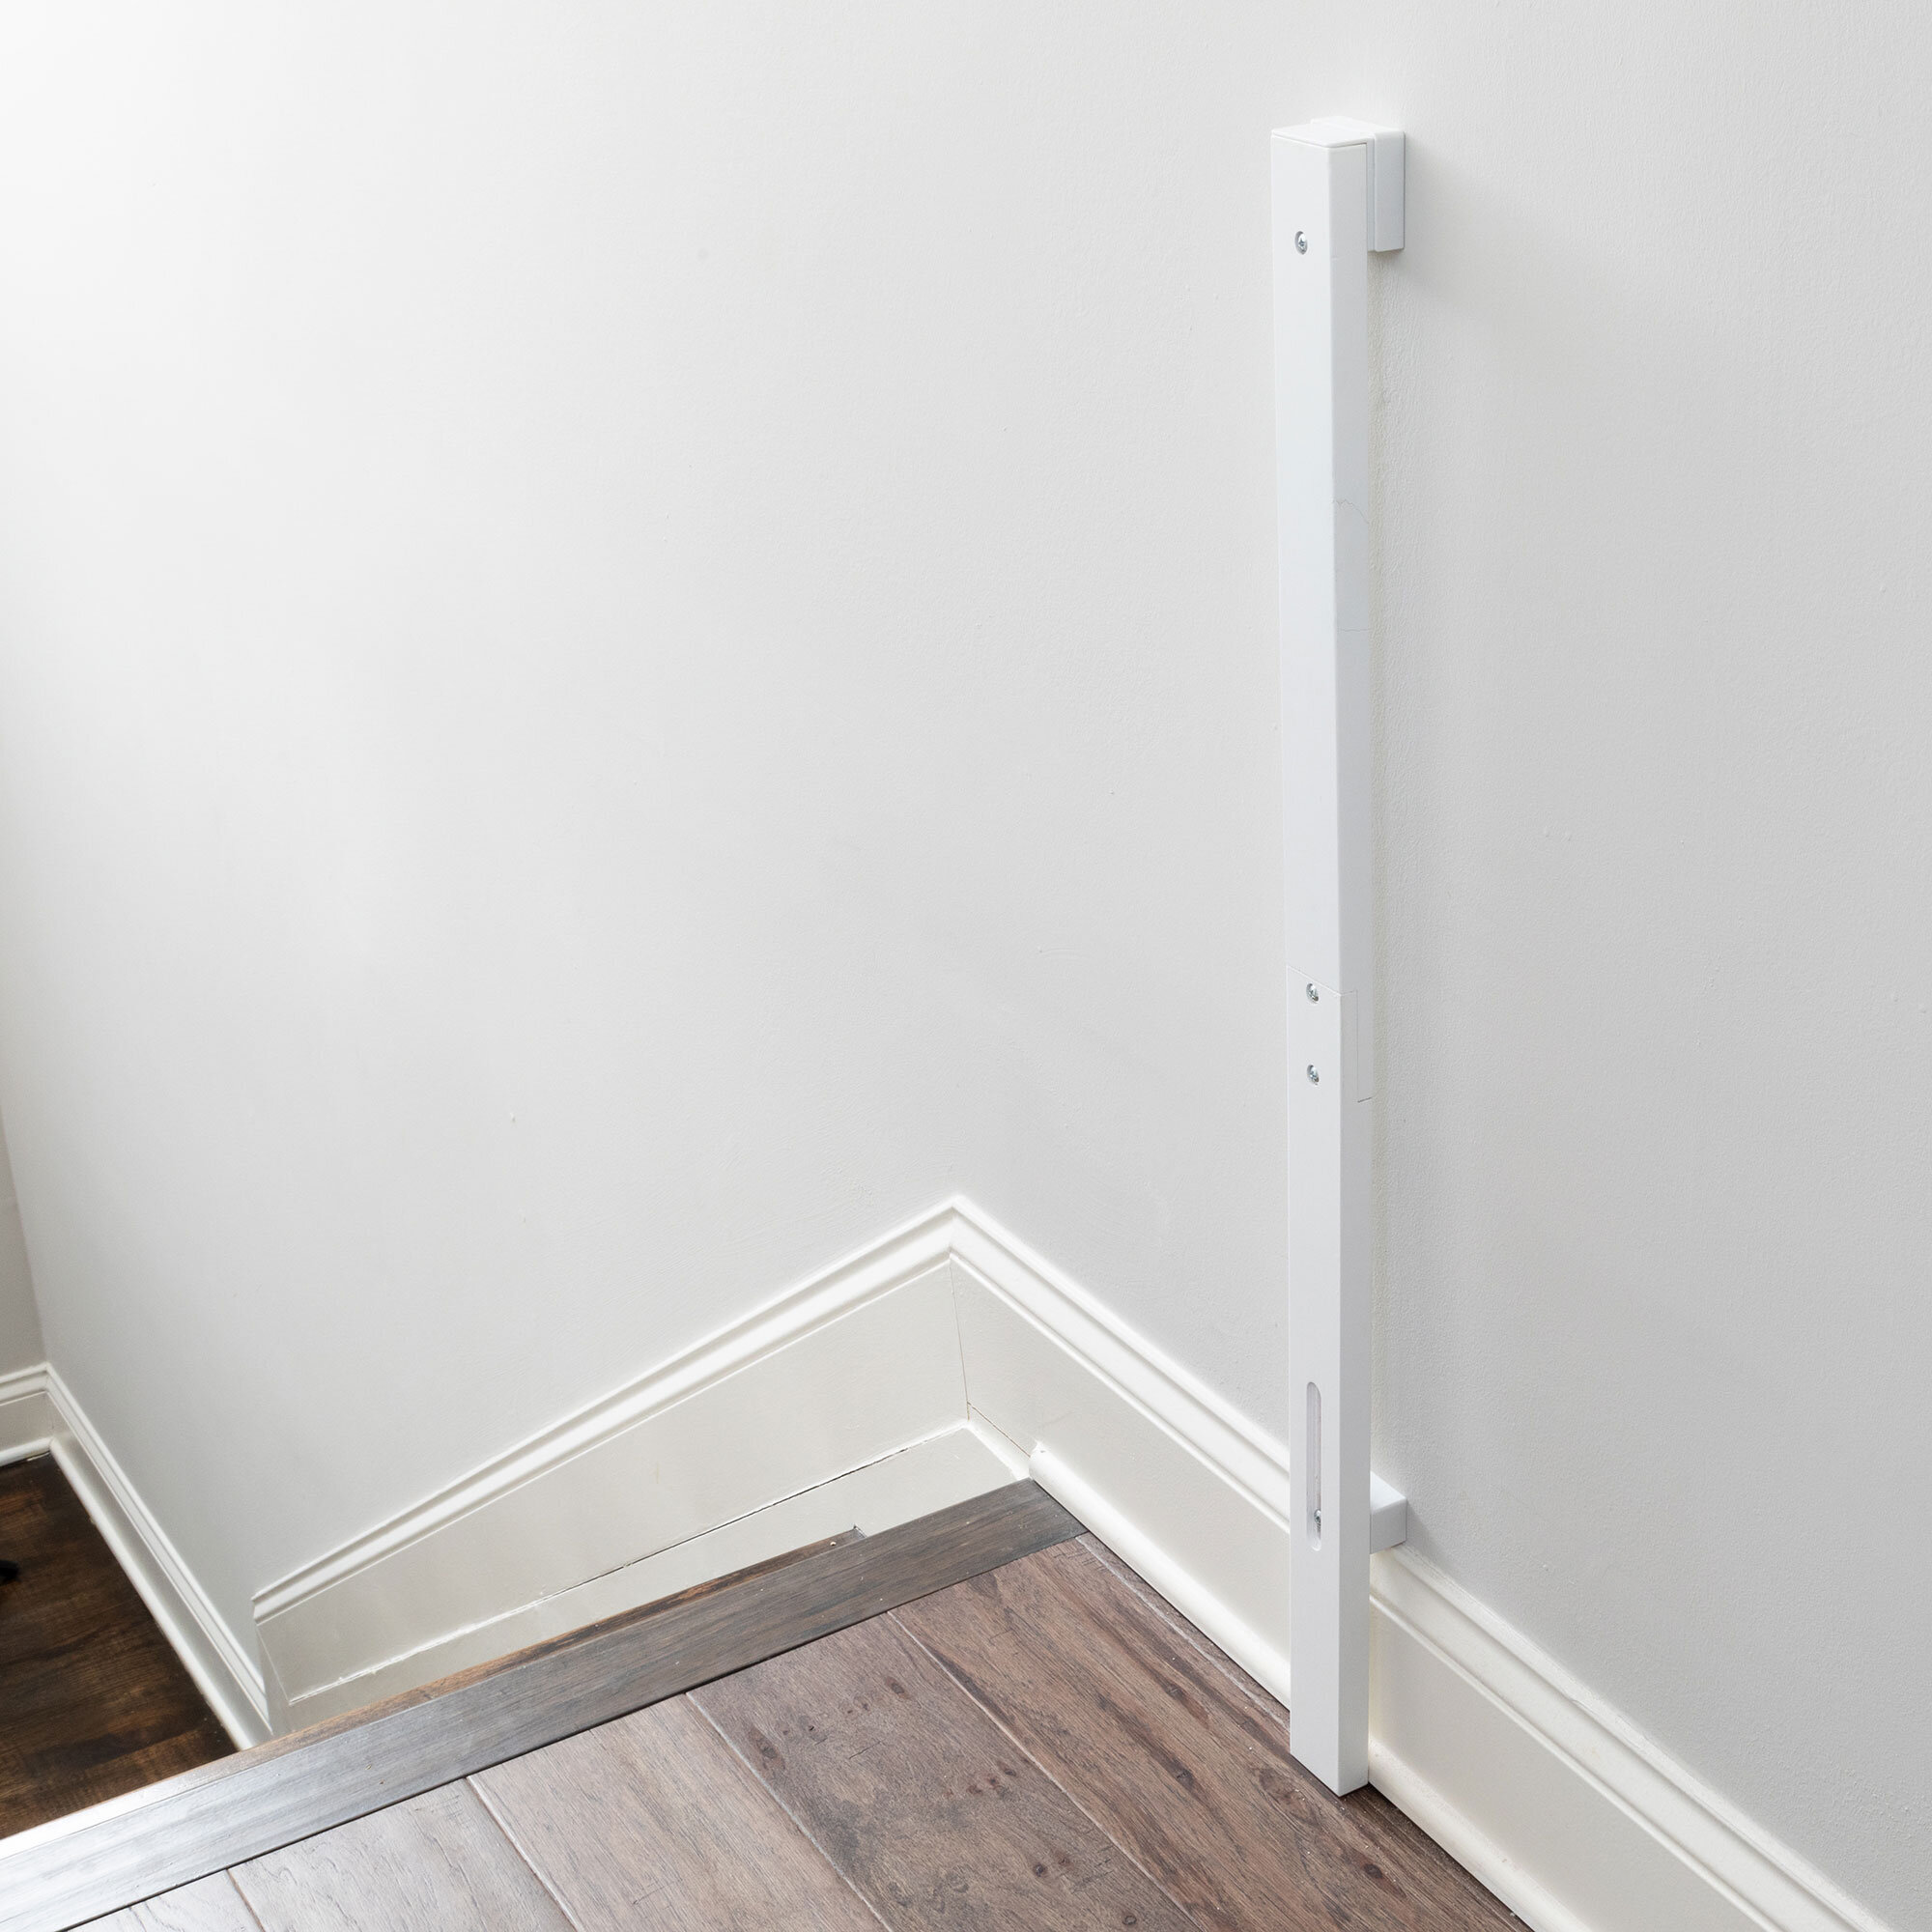 Universal Baseboard Kit Installed at top of stairs